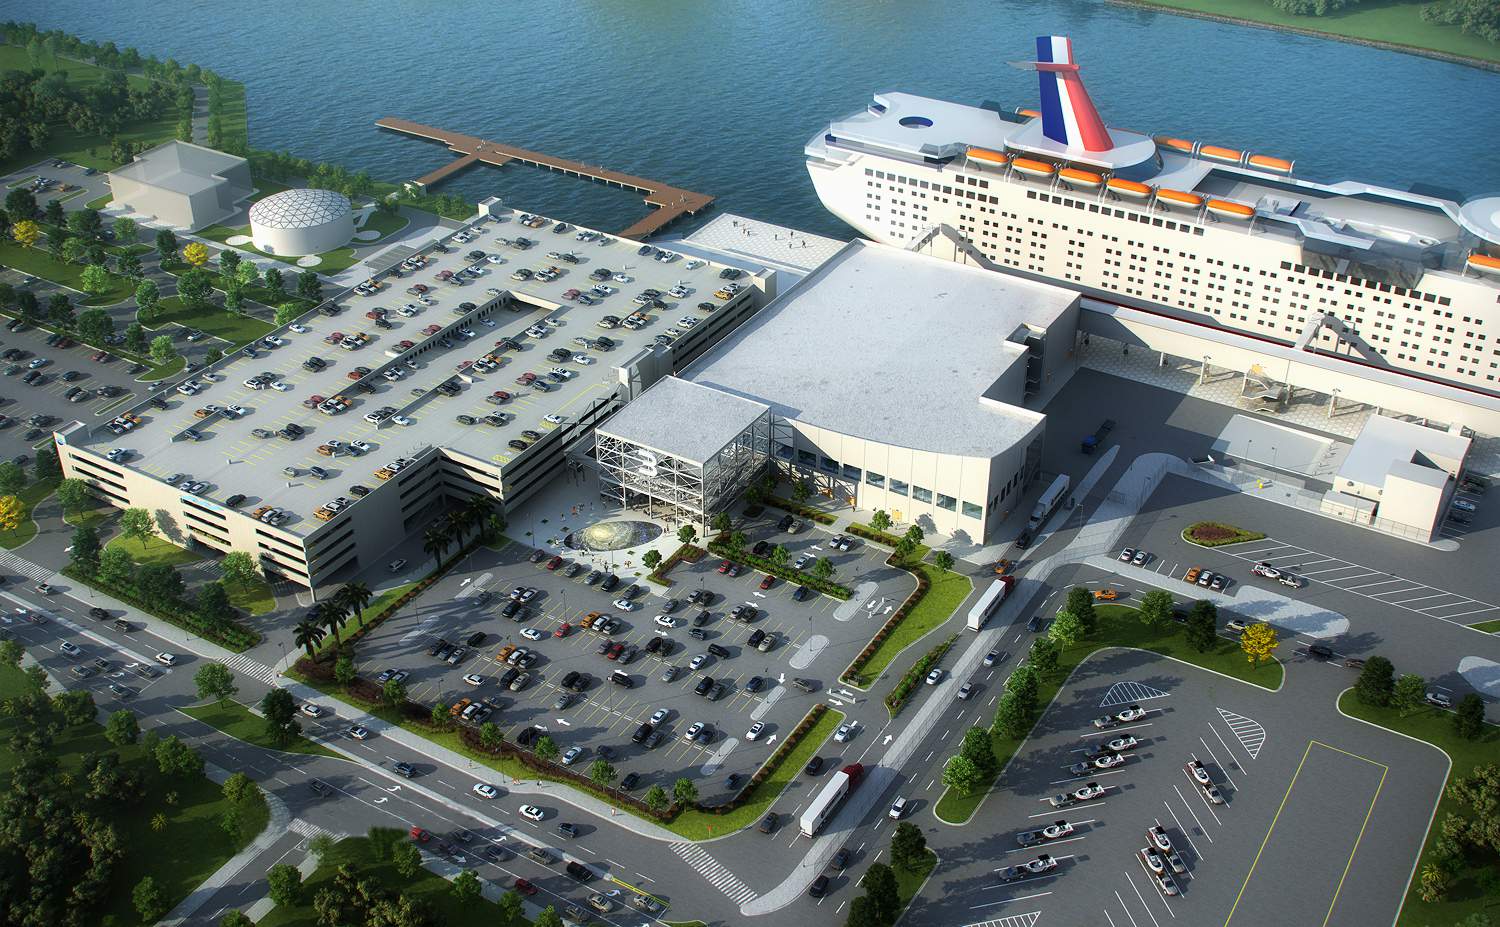 Port Canaveral’s new $155M cruise terminal remains unused due to pandemic